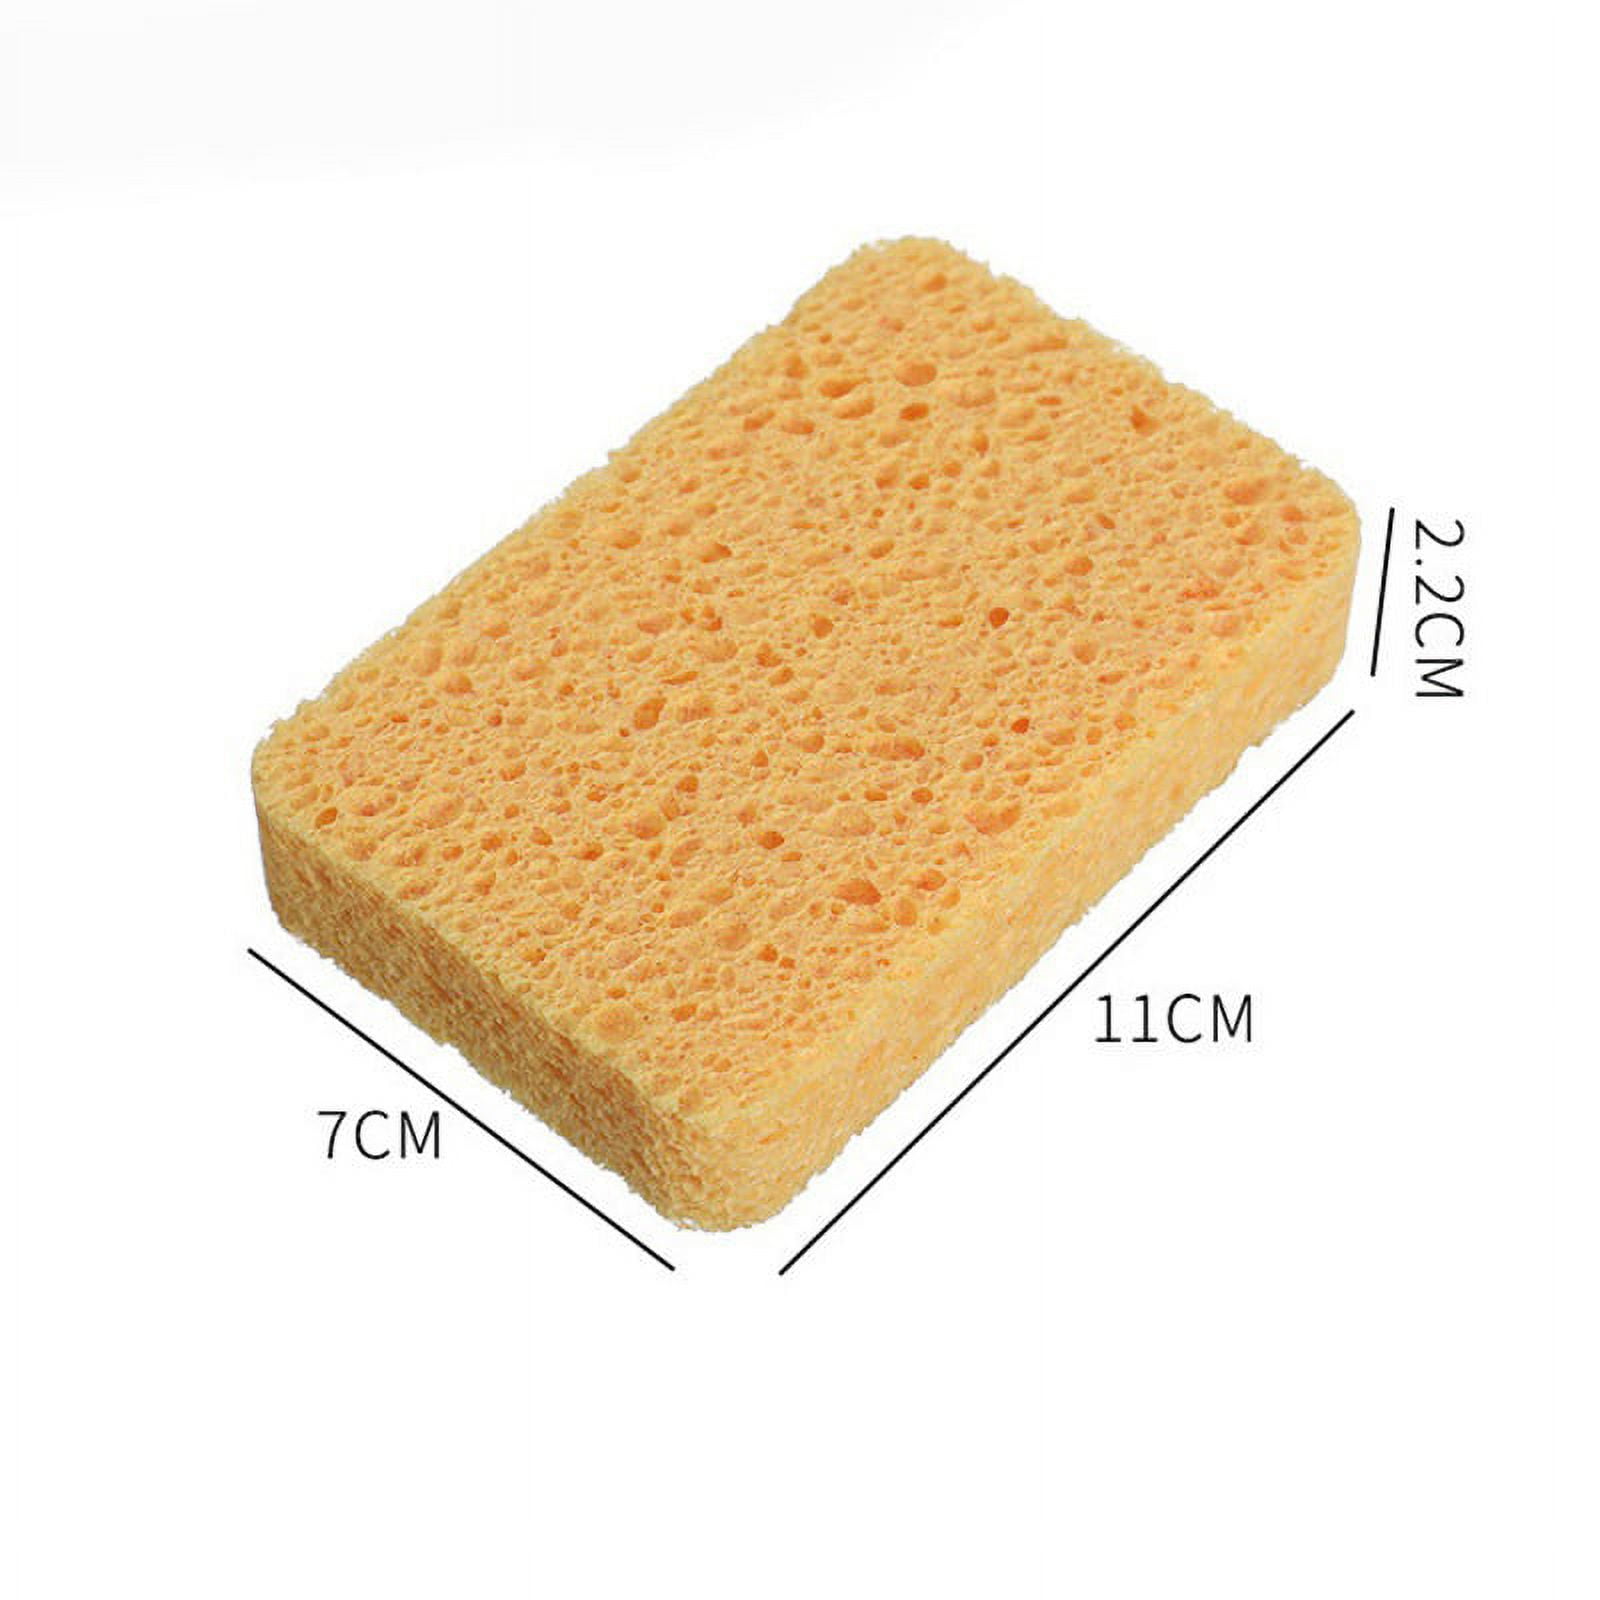  Temede Large Cellulose Sponges, Kitchen Sponges for Dish, Thick  Heavy Duty Scrub Sponges, Non-Scratch Scrubber for Household, Cookware,  Bathroom, Compressed Packaging (5 Pack) : Health & Household